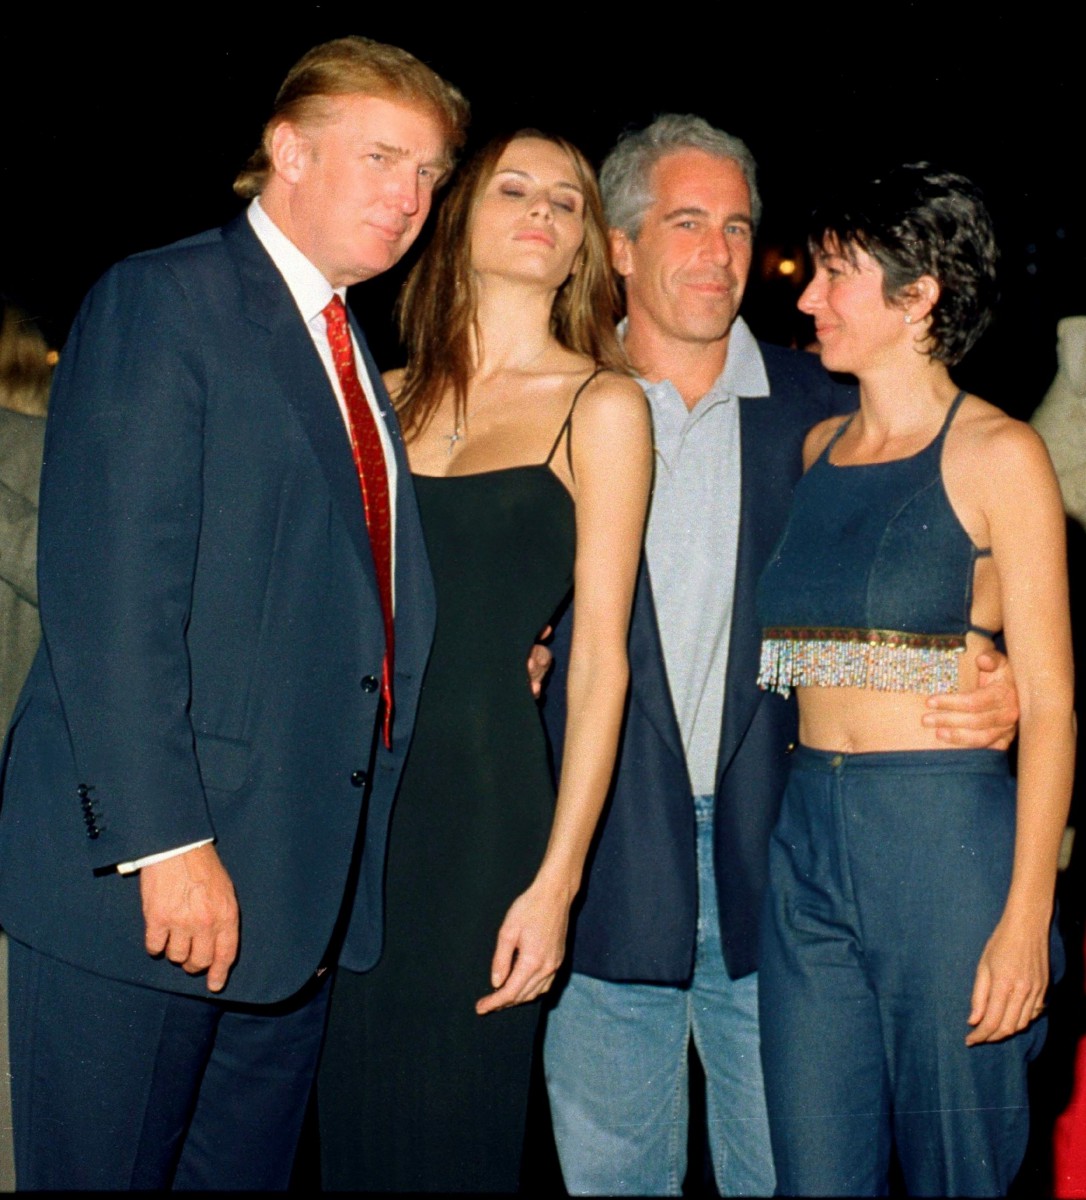 Jeffrey Epstein with his arm around Ghislaine Maxwell with Donald Trump and Melania Knauss, who he later married. Pictured here in February 2000